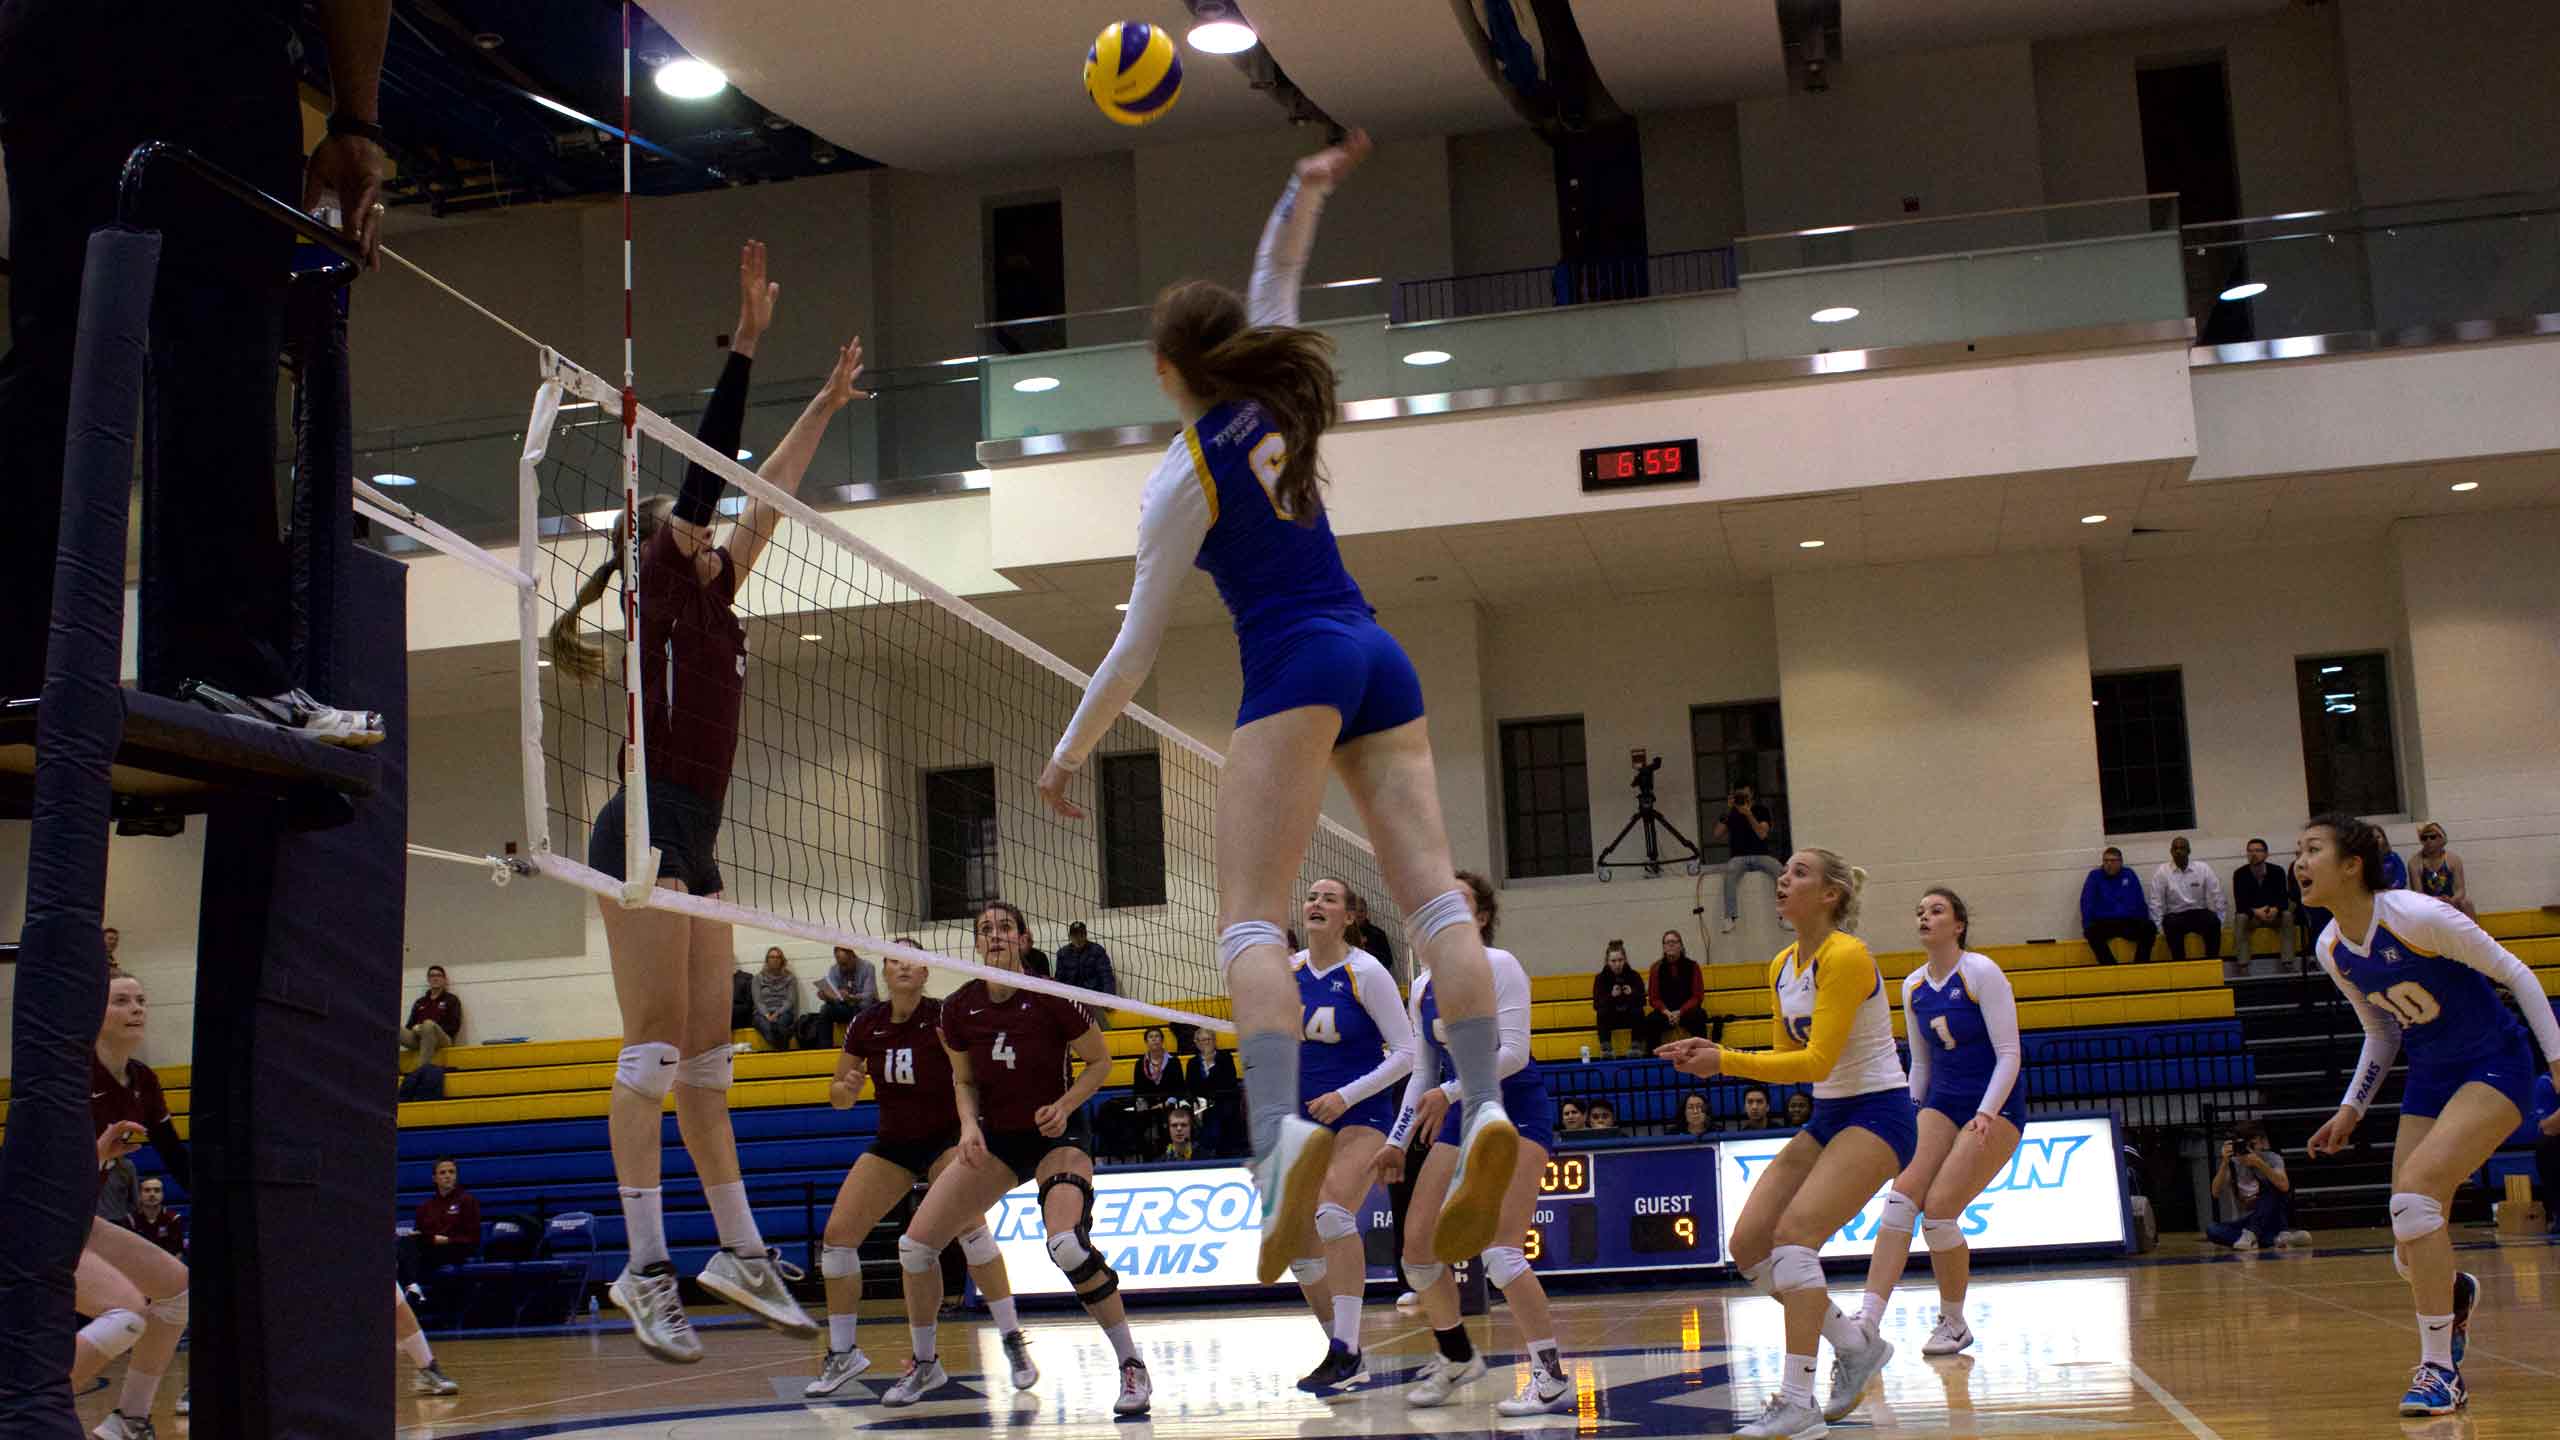 A rams volleyball player goes for a strike